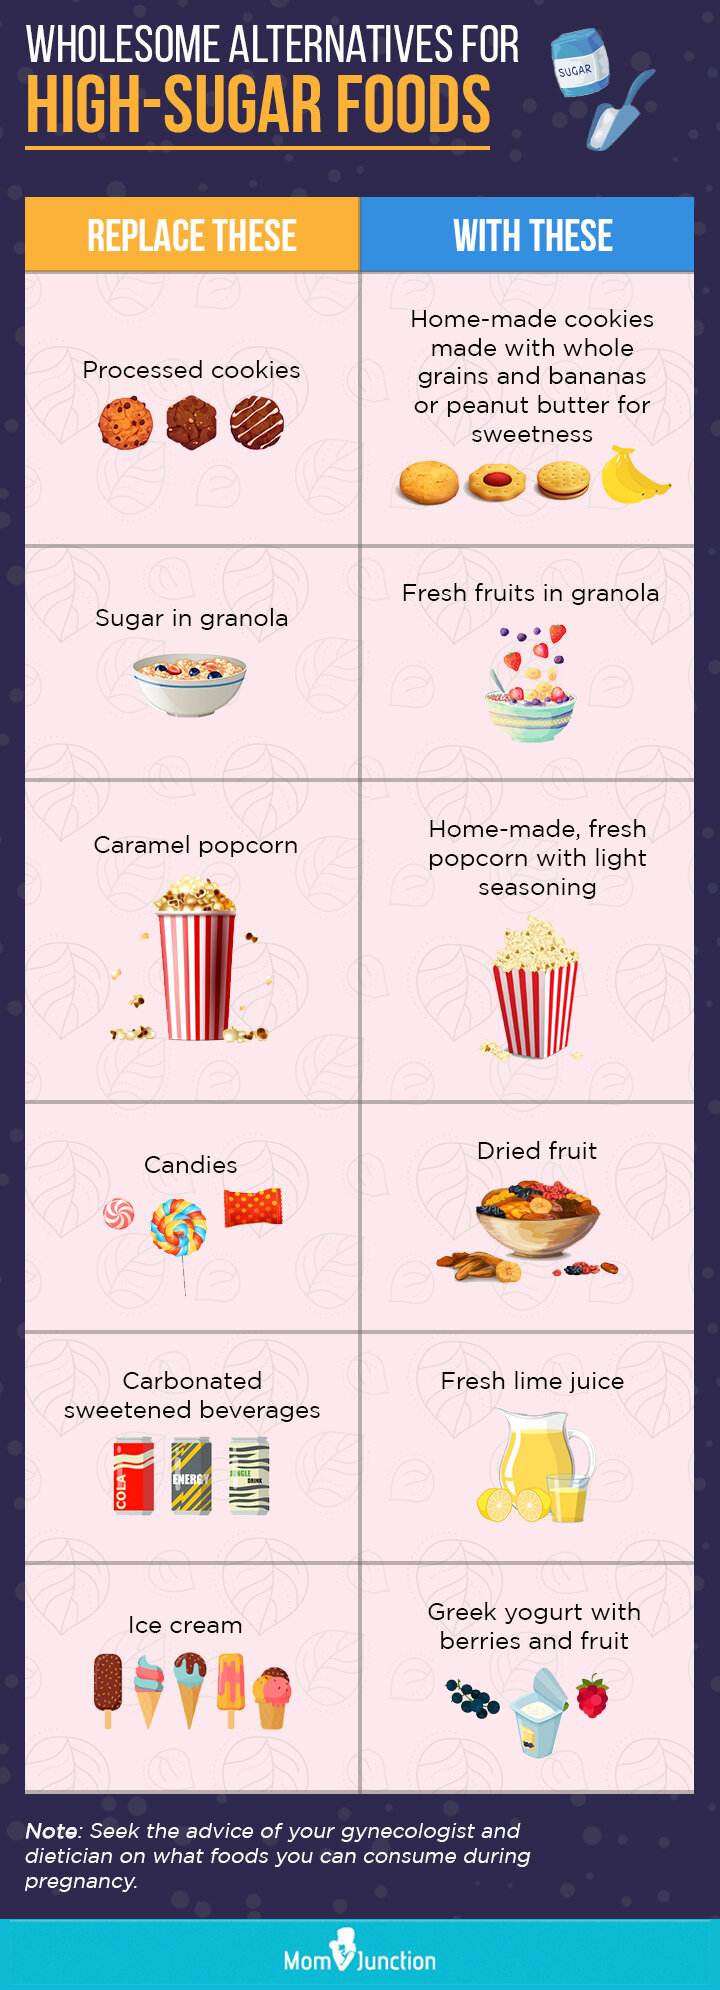 wholesome alternatives for high sugar foods(infographic)